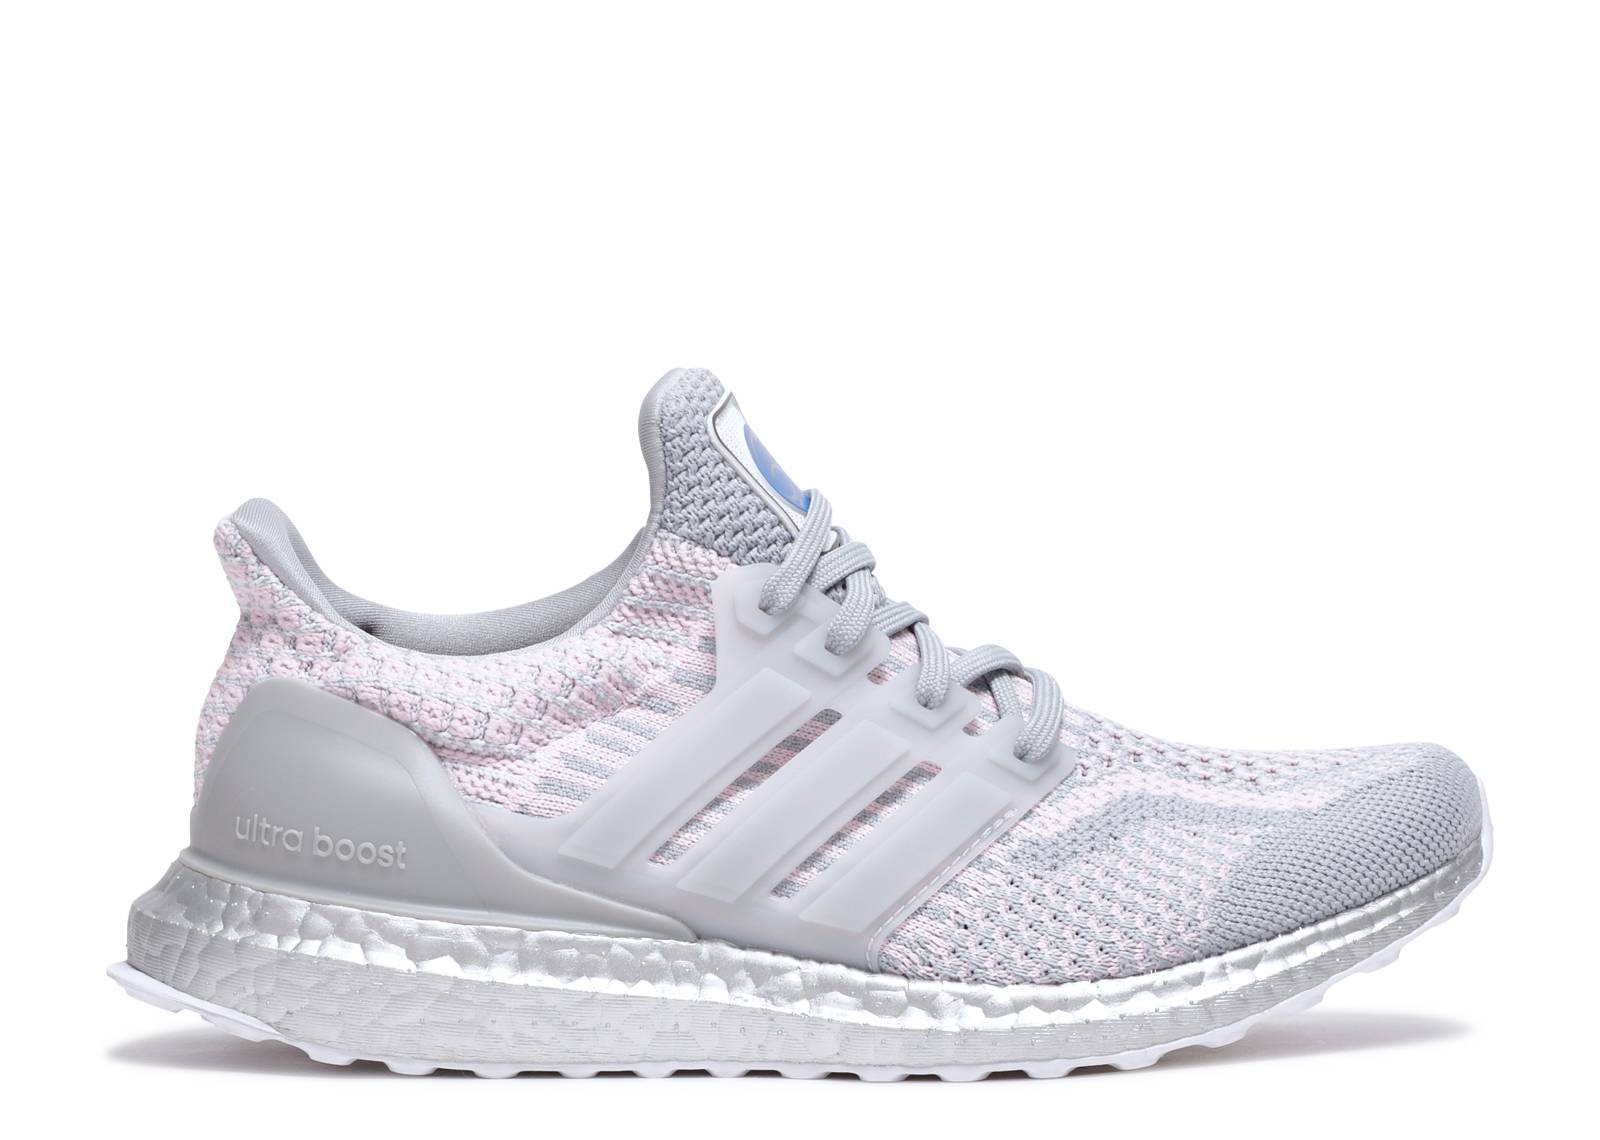 Wmns UltraBoost 5.0 DNA 'Halo Silver'